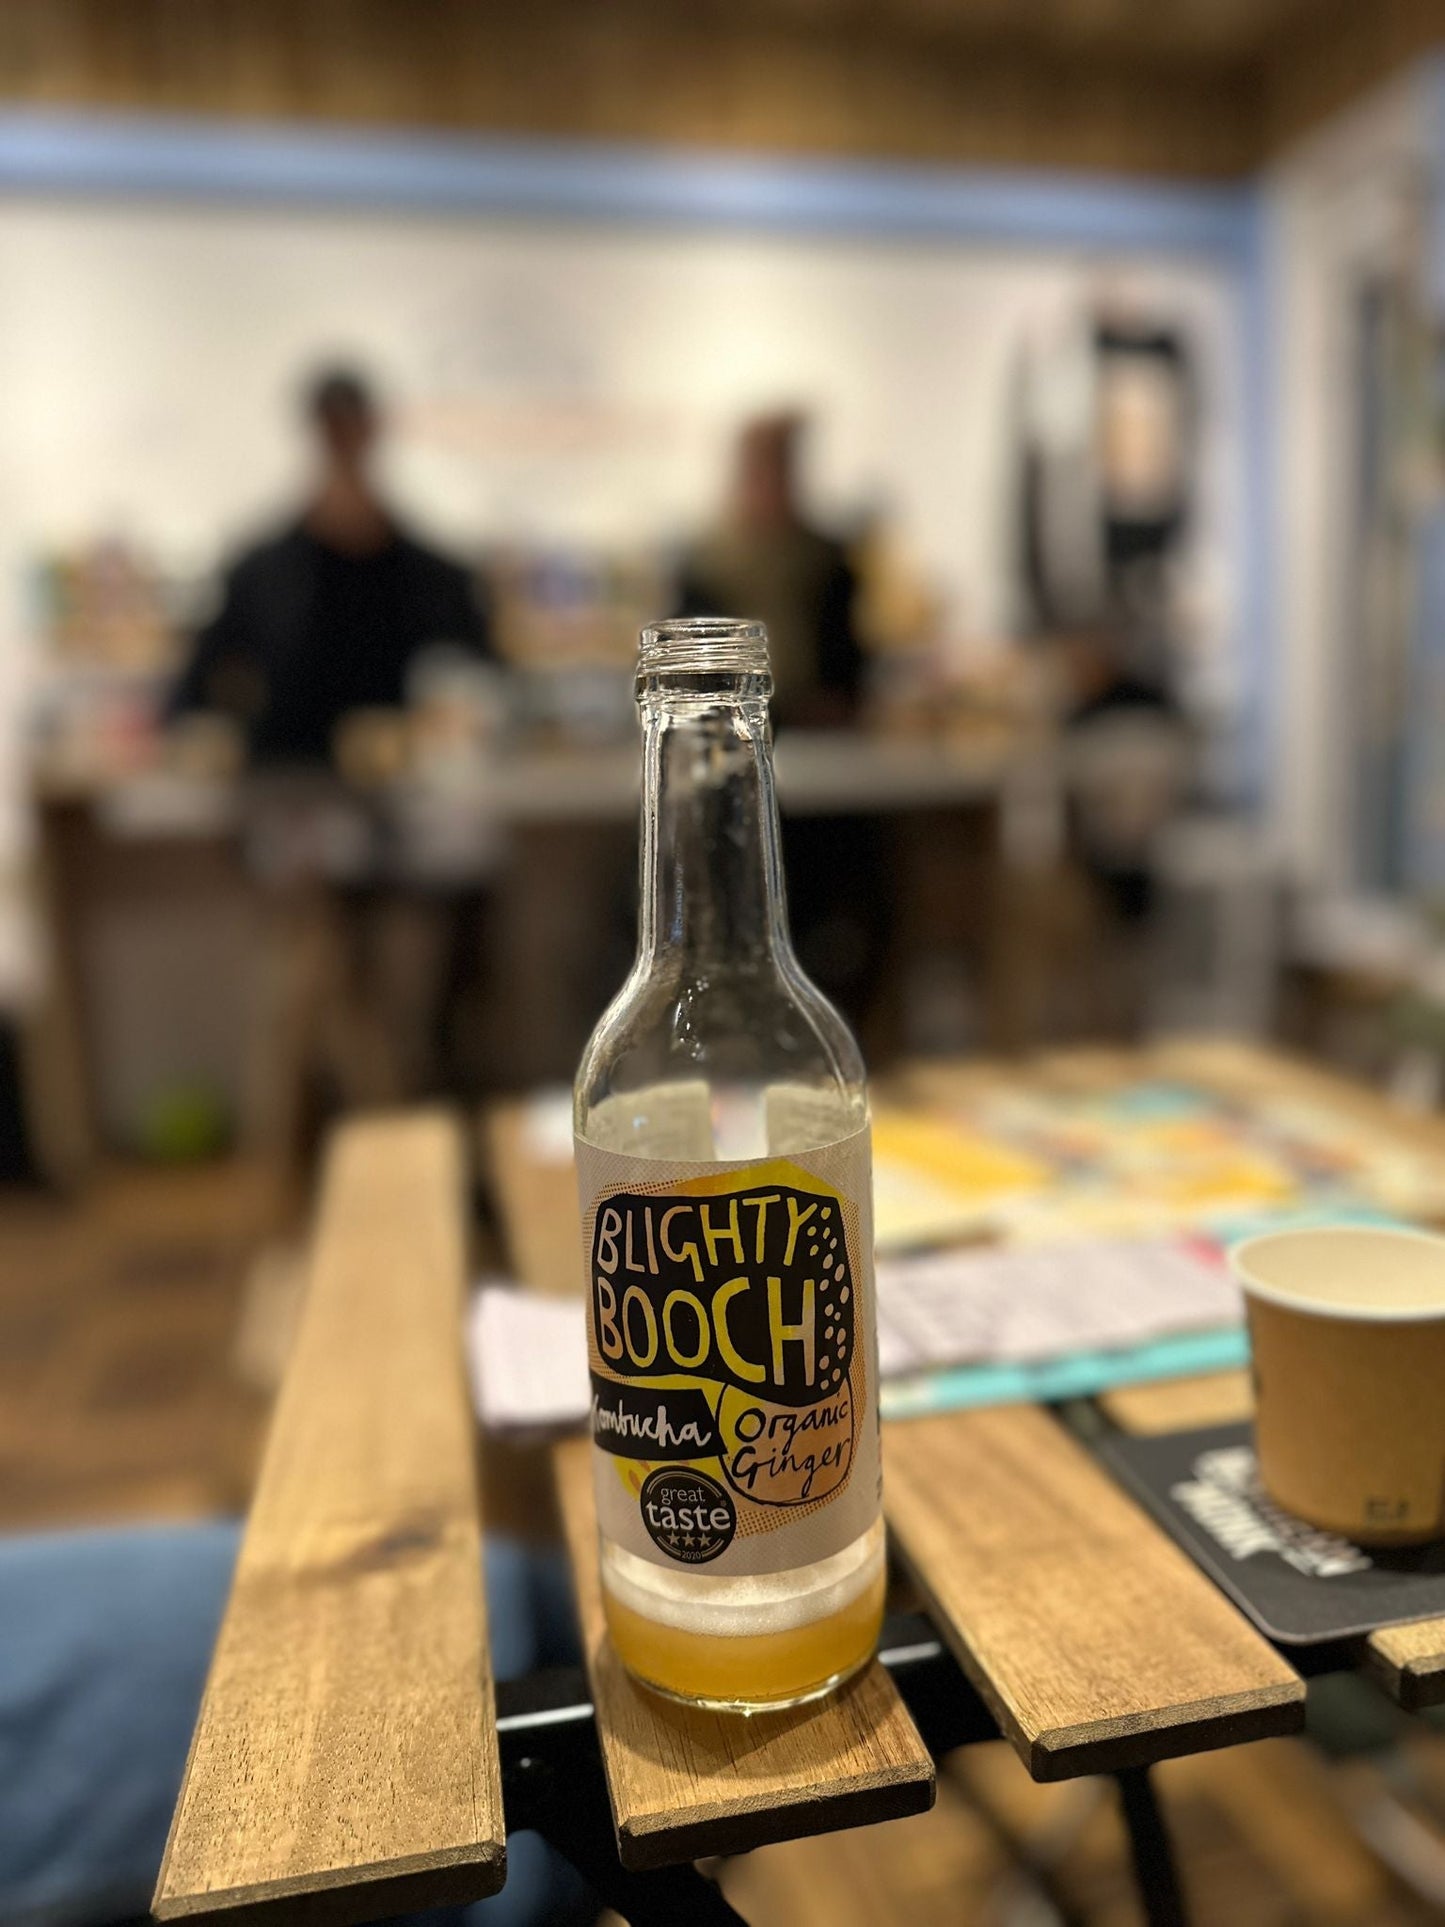 Kombucha Tasting Session on Wed 20th March at 7pm - 8:30pm